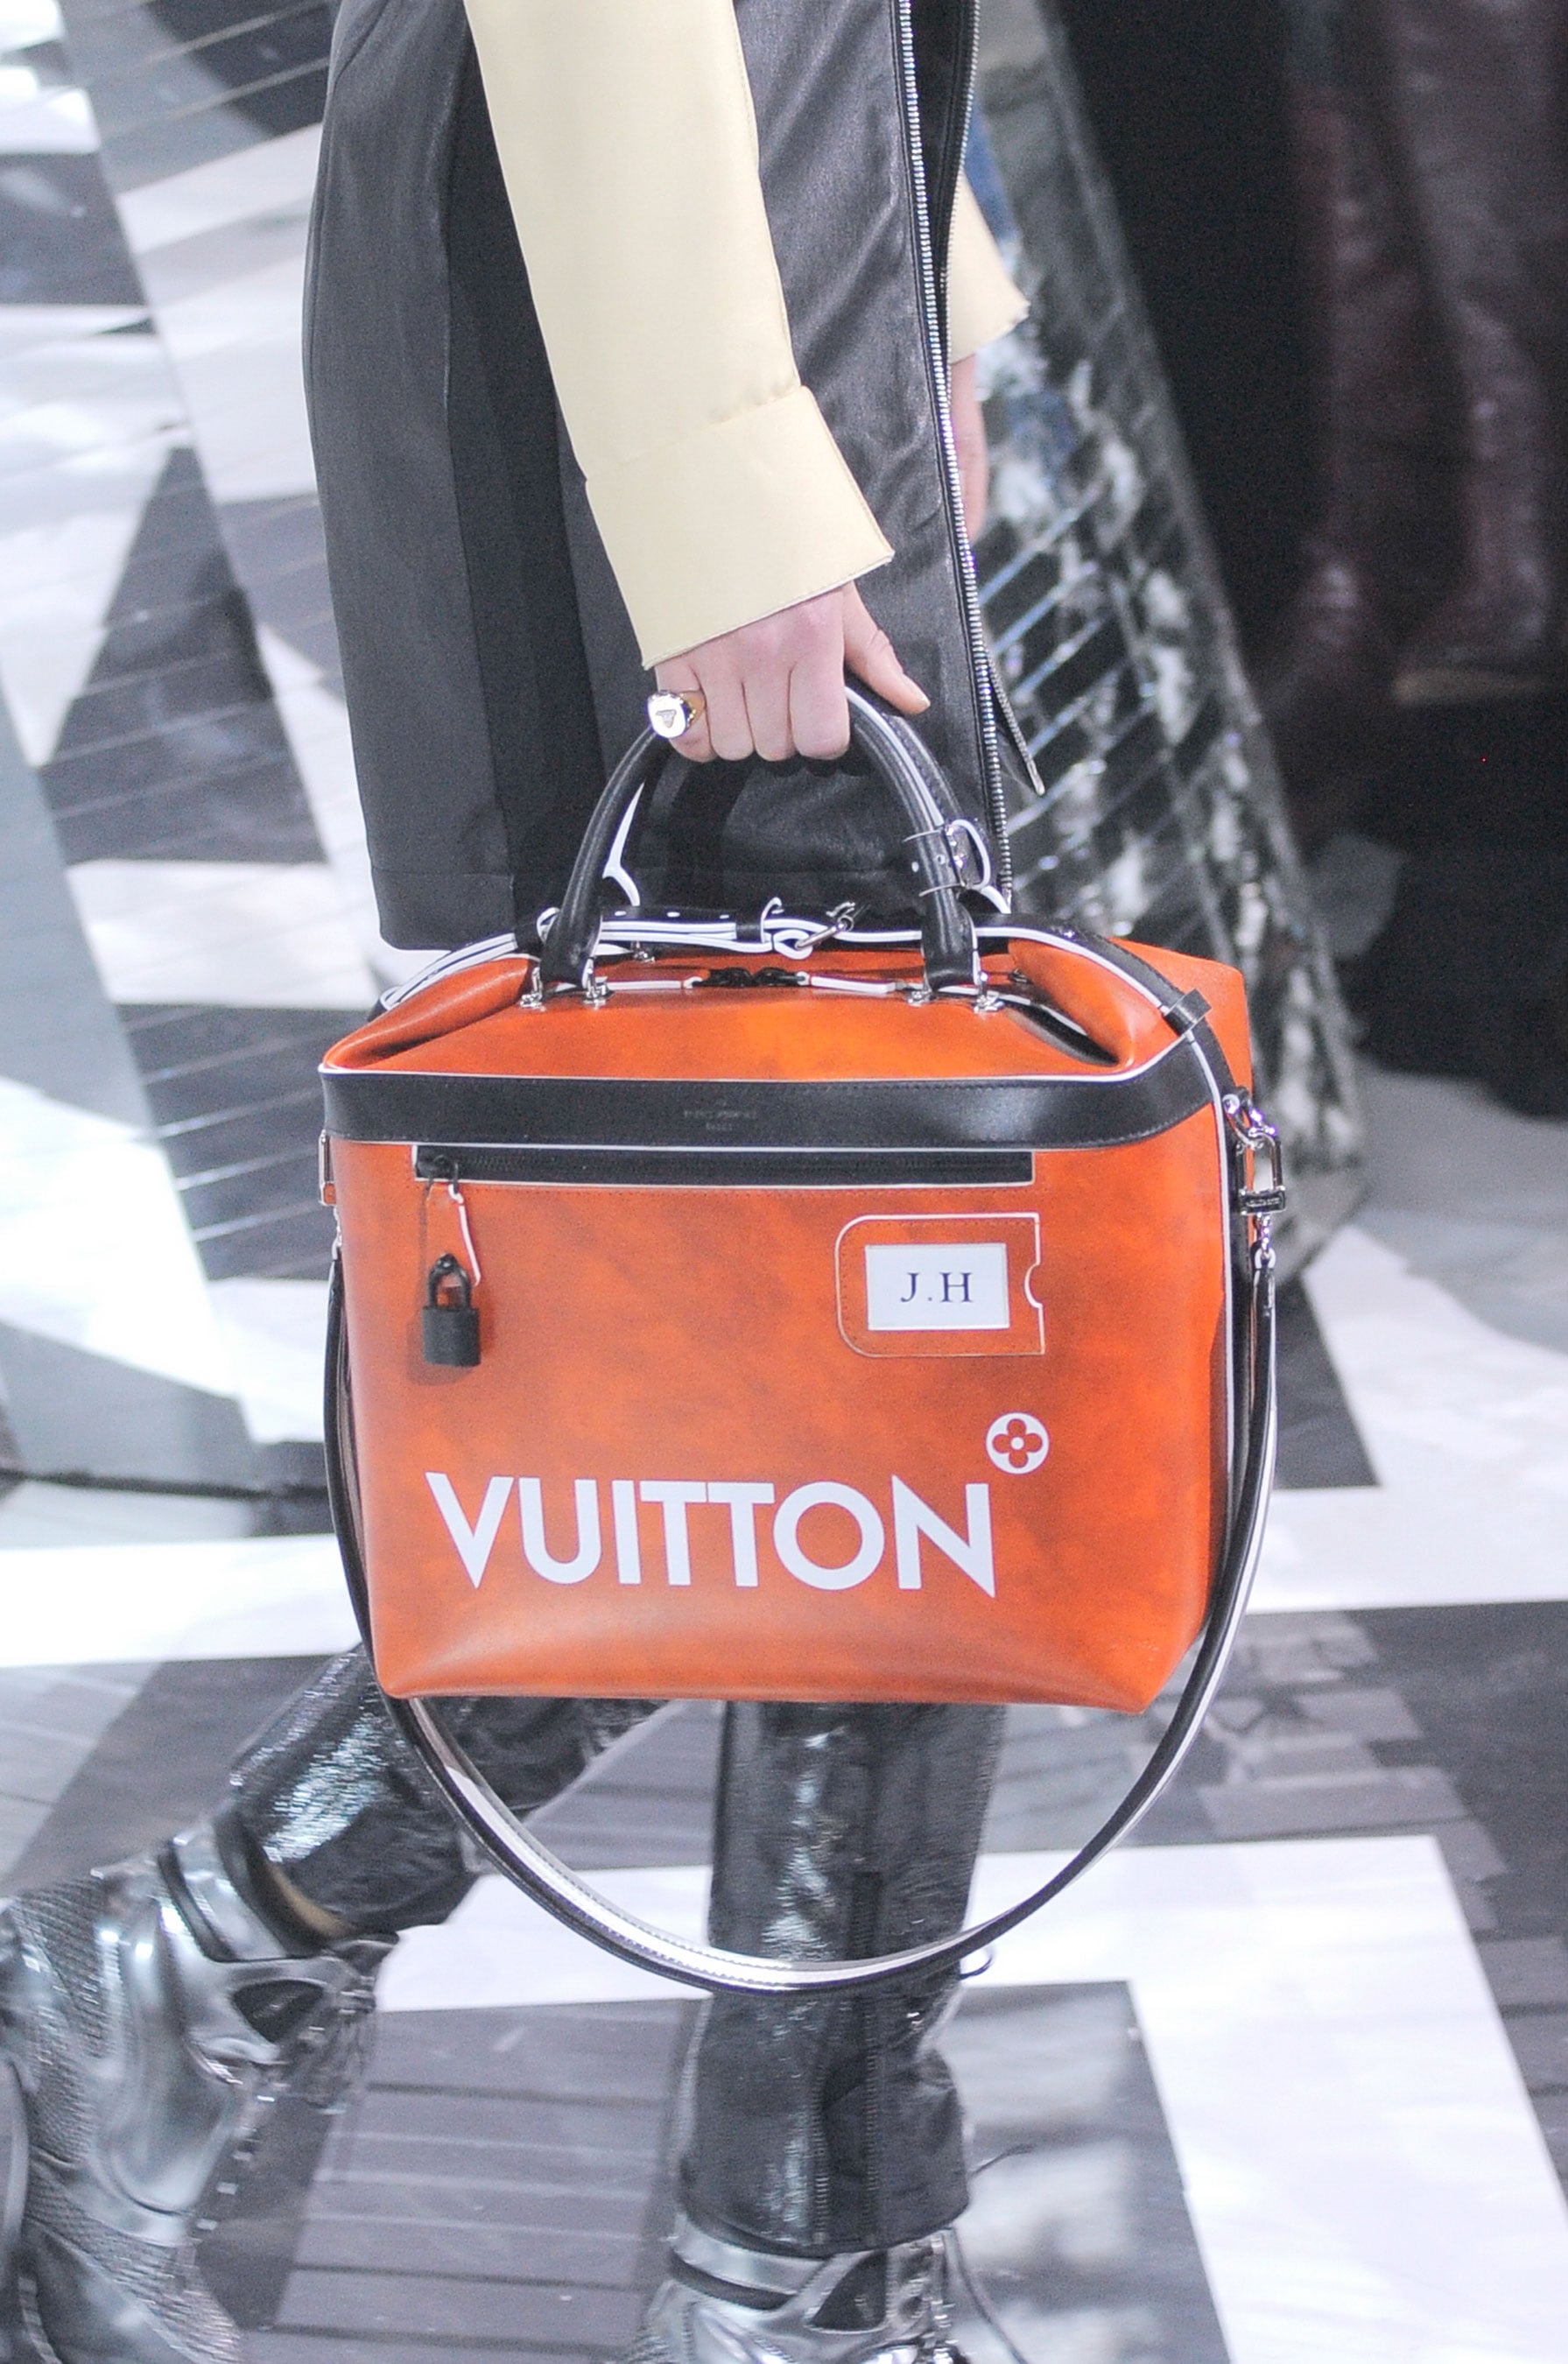 Louis Vuitton Fall 2016, Chanel, Louis Vuitton, Celine: Come See the  Amazing Bags From Paris Fashion Week